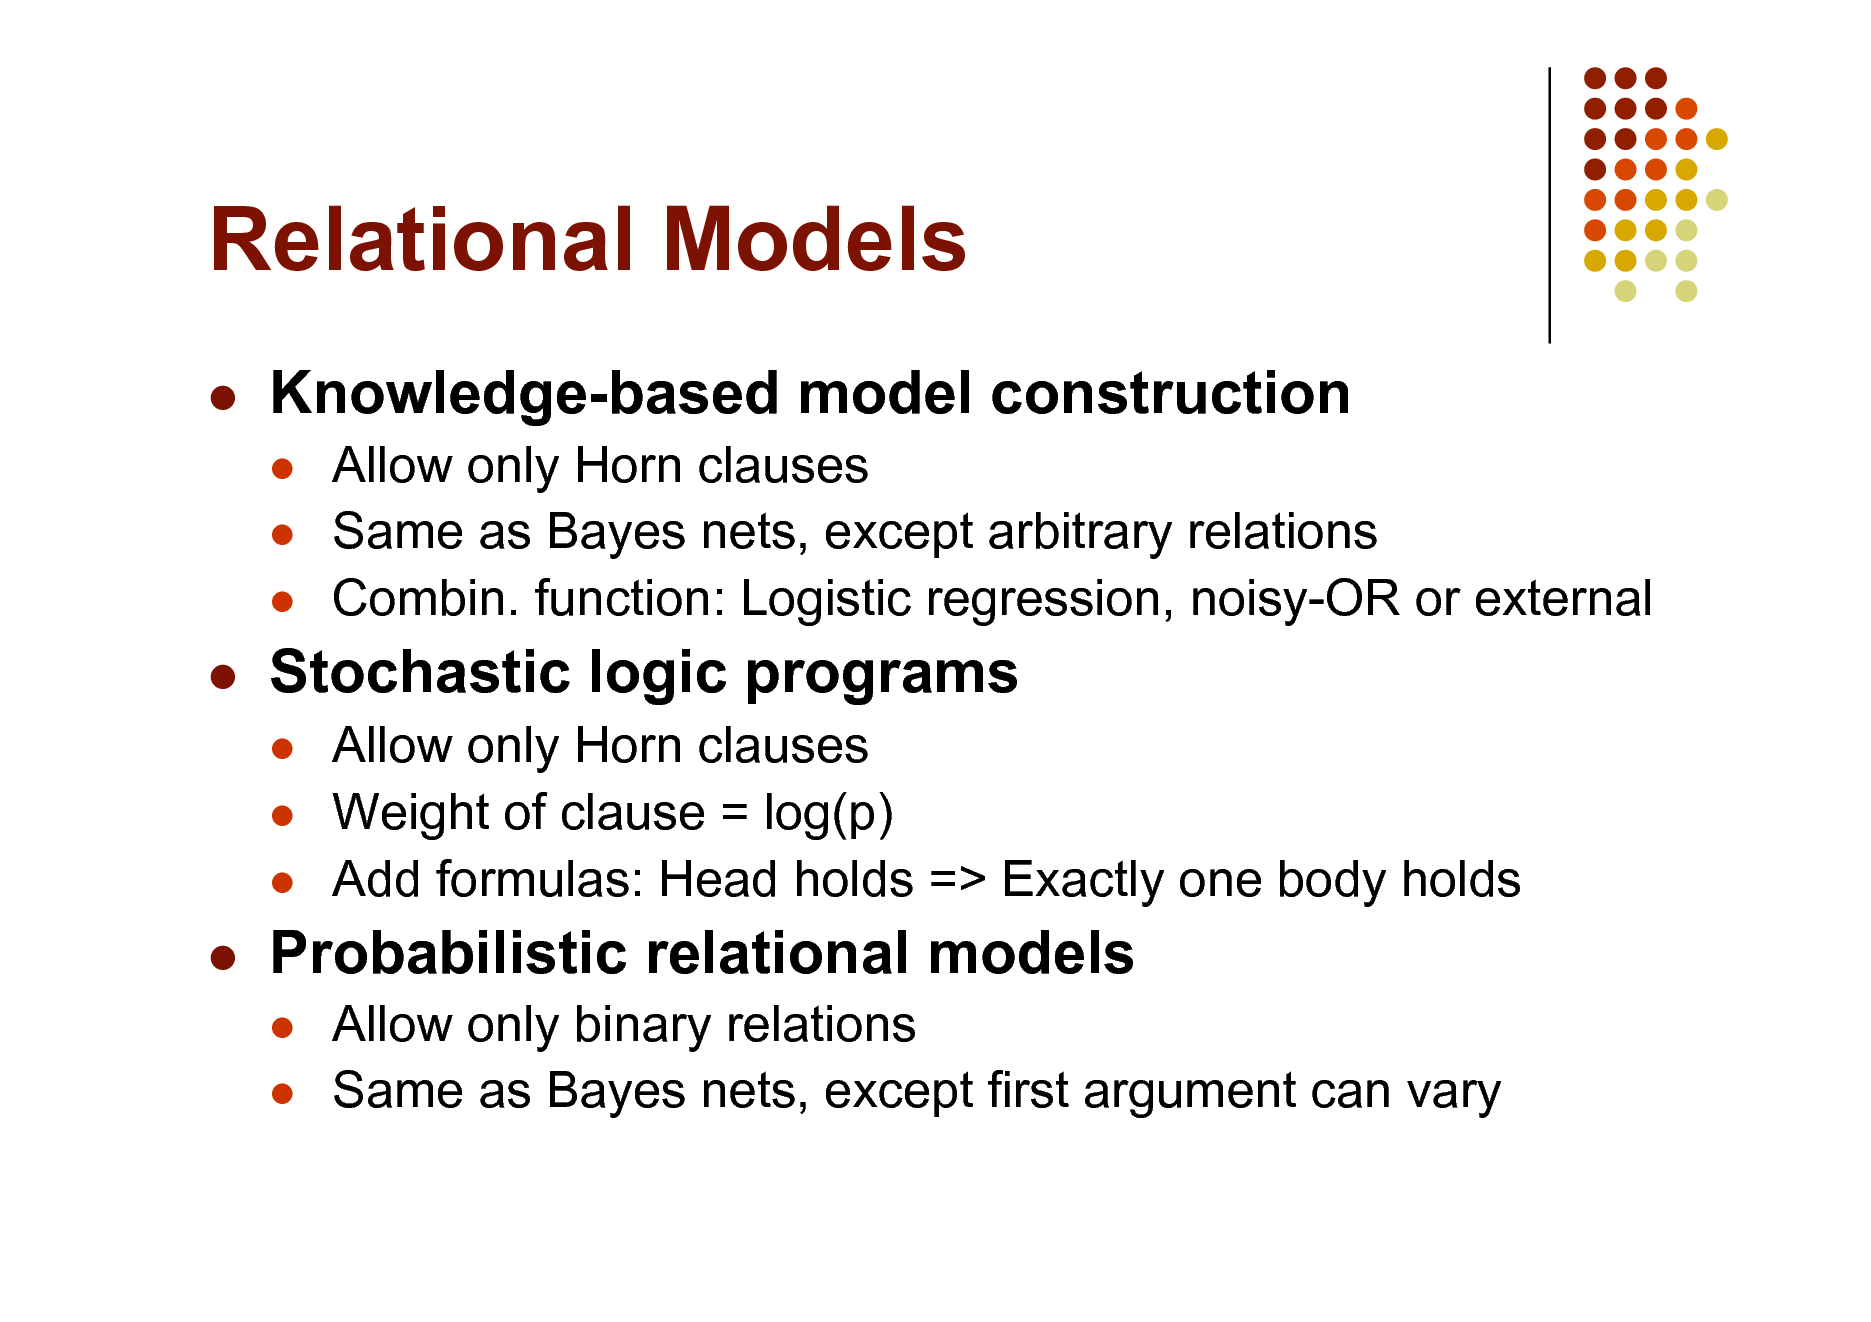 Slide: Relational Models


Knowledge-based model construction
  

Allow only Horn clauses Same as Bayes nets, except arbitrary relations Combin. function: Logistic regression, noisy-OR or external Allow only Horn clauses Weight of clause = log(p) Add formulas: Head holds => Exactly one body holds Allow only binary relations Same as Bayes nets, except first argument can vary



Stochastic logic programs
  



Probabilistic relational models
 

